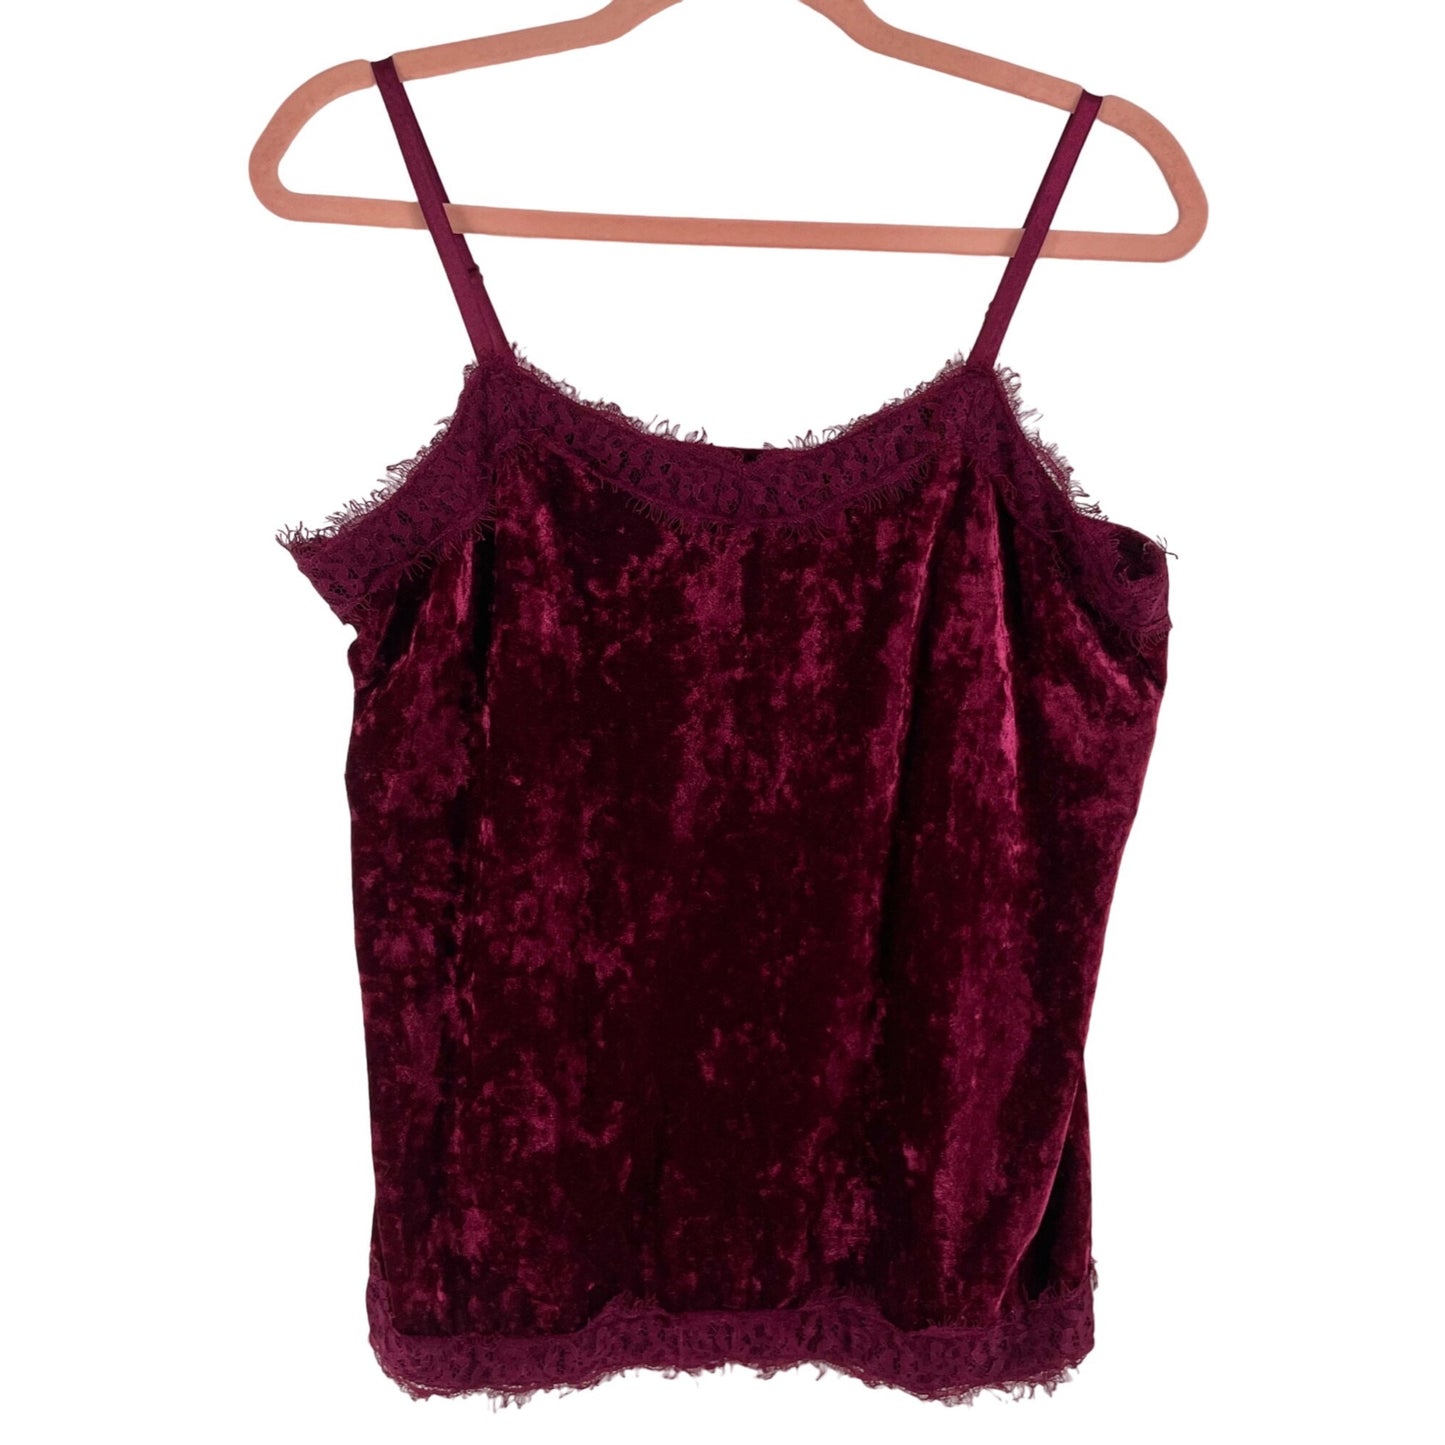 No Boundaries Girl's Size 11-13 L Maroon/Burgundy Crushed Velvet Cami W/ Lace Trim